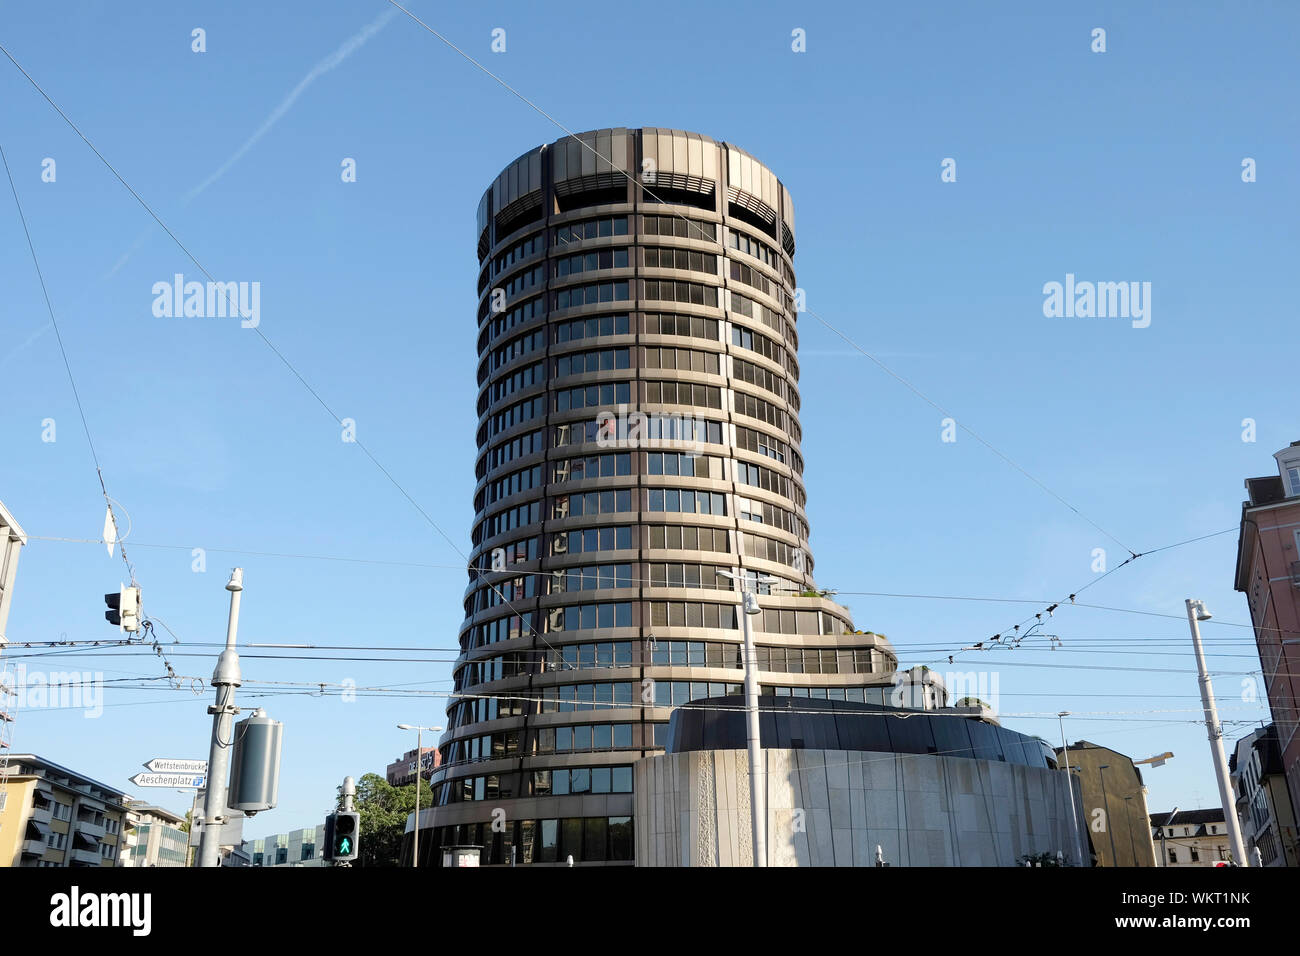 A view of the bank for international settlements in Basel, Switzerland Stock Photo